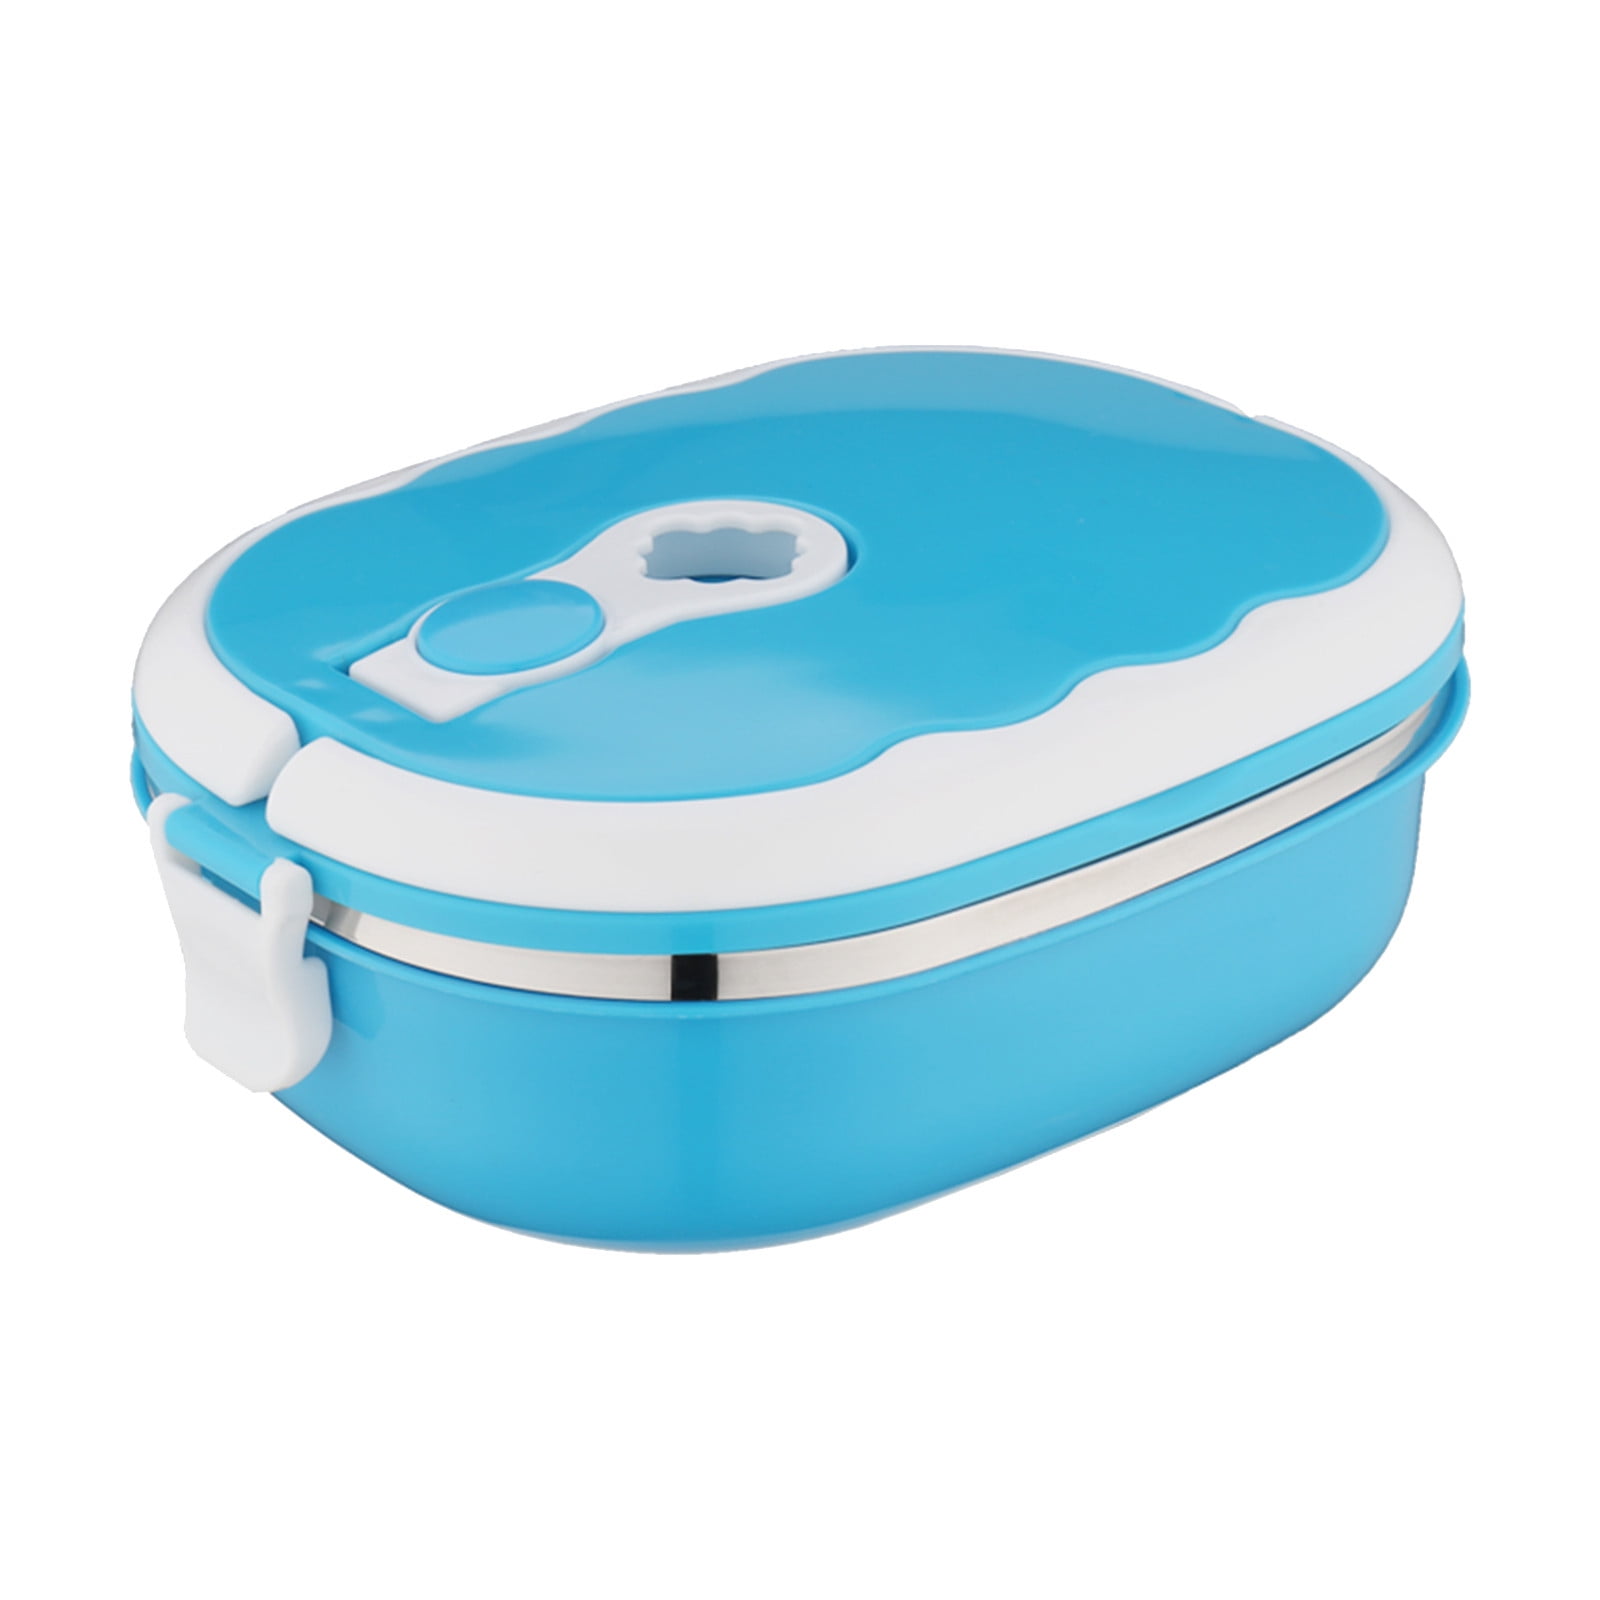 Xmmswdla Bento Box Adult Lunch BoxBlue Lunch Box2100ml 3 Layer Round Food Lunch Box Stainless Steel Lunch Box Lunch Box Food Storage Box Children's